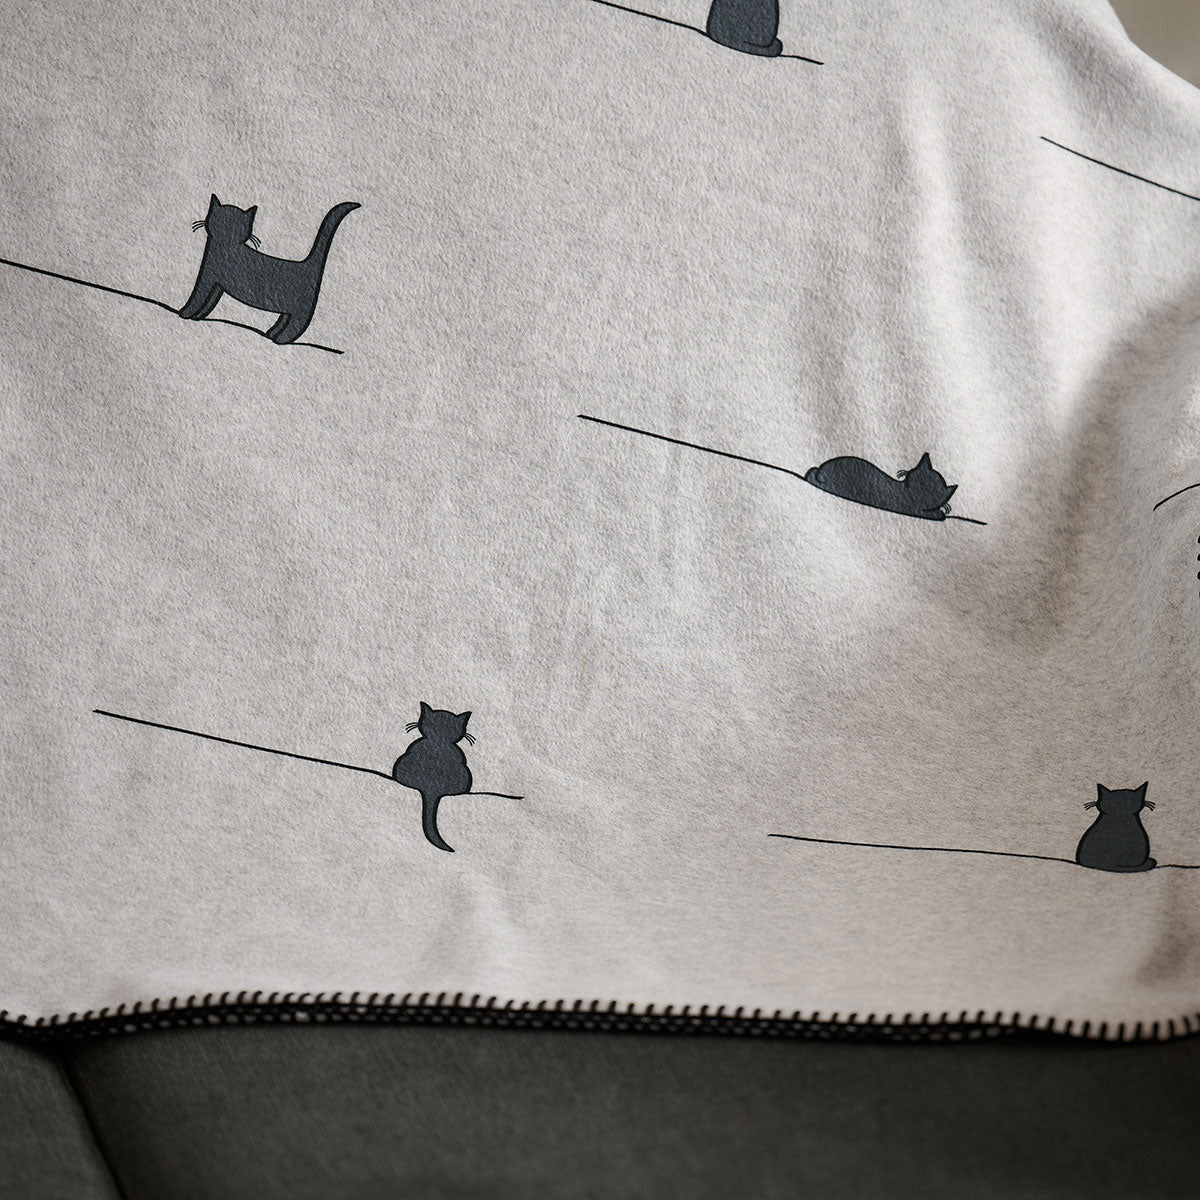 Cat Collection Blanket